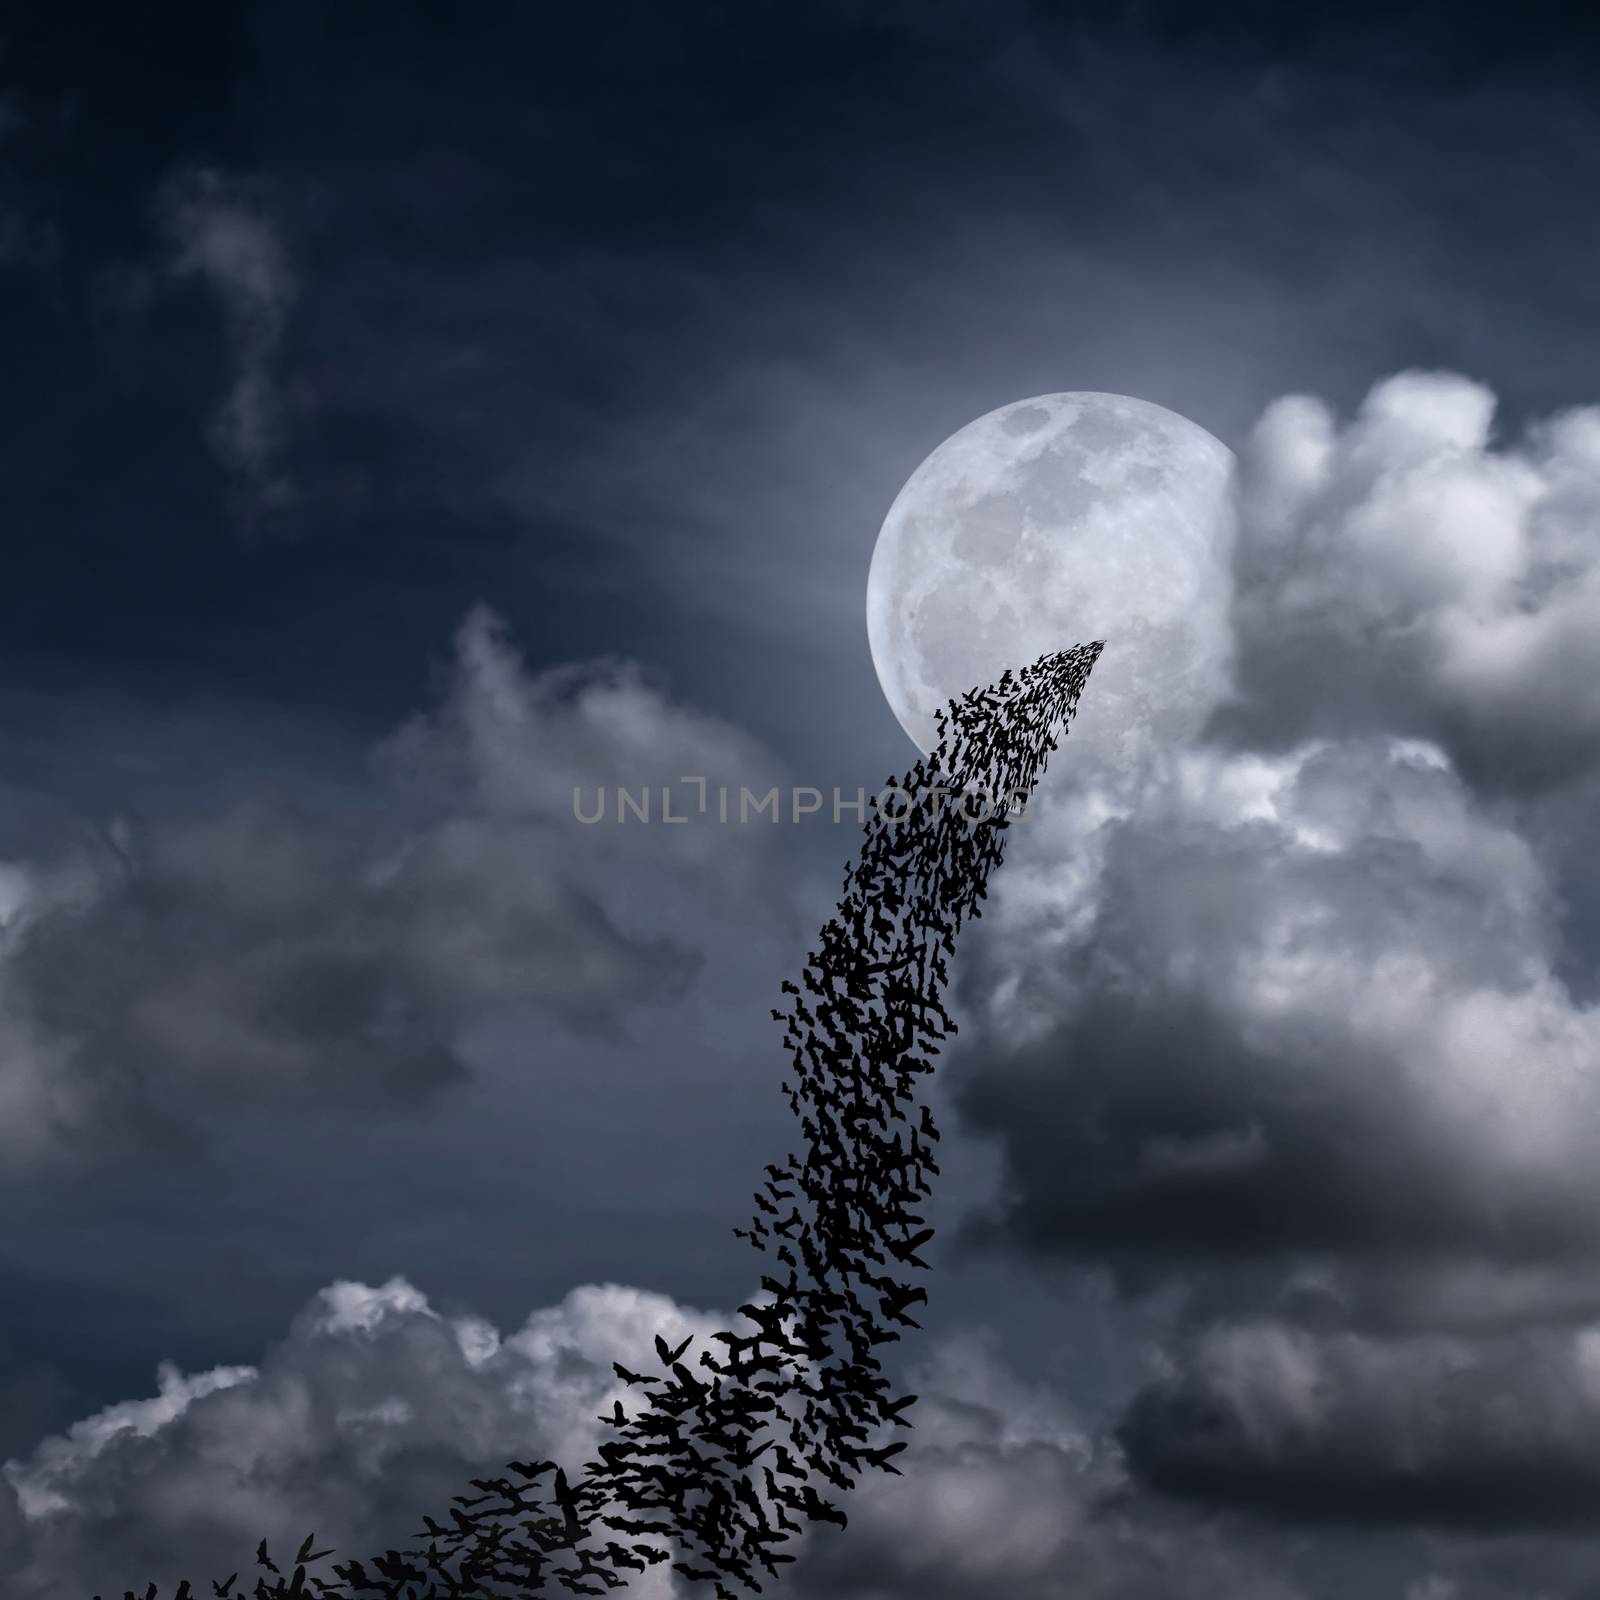 Bats and full moon  by Exsodus